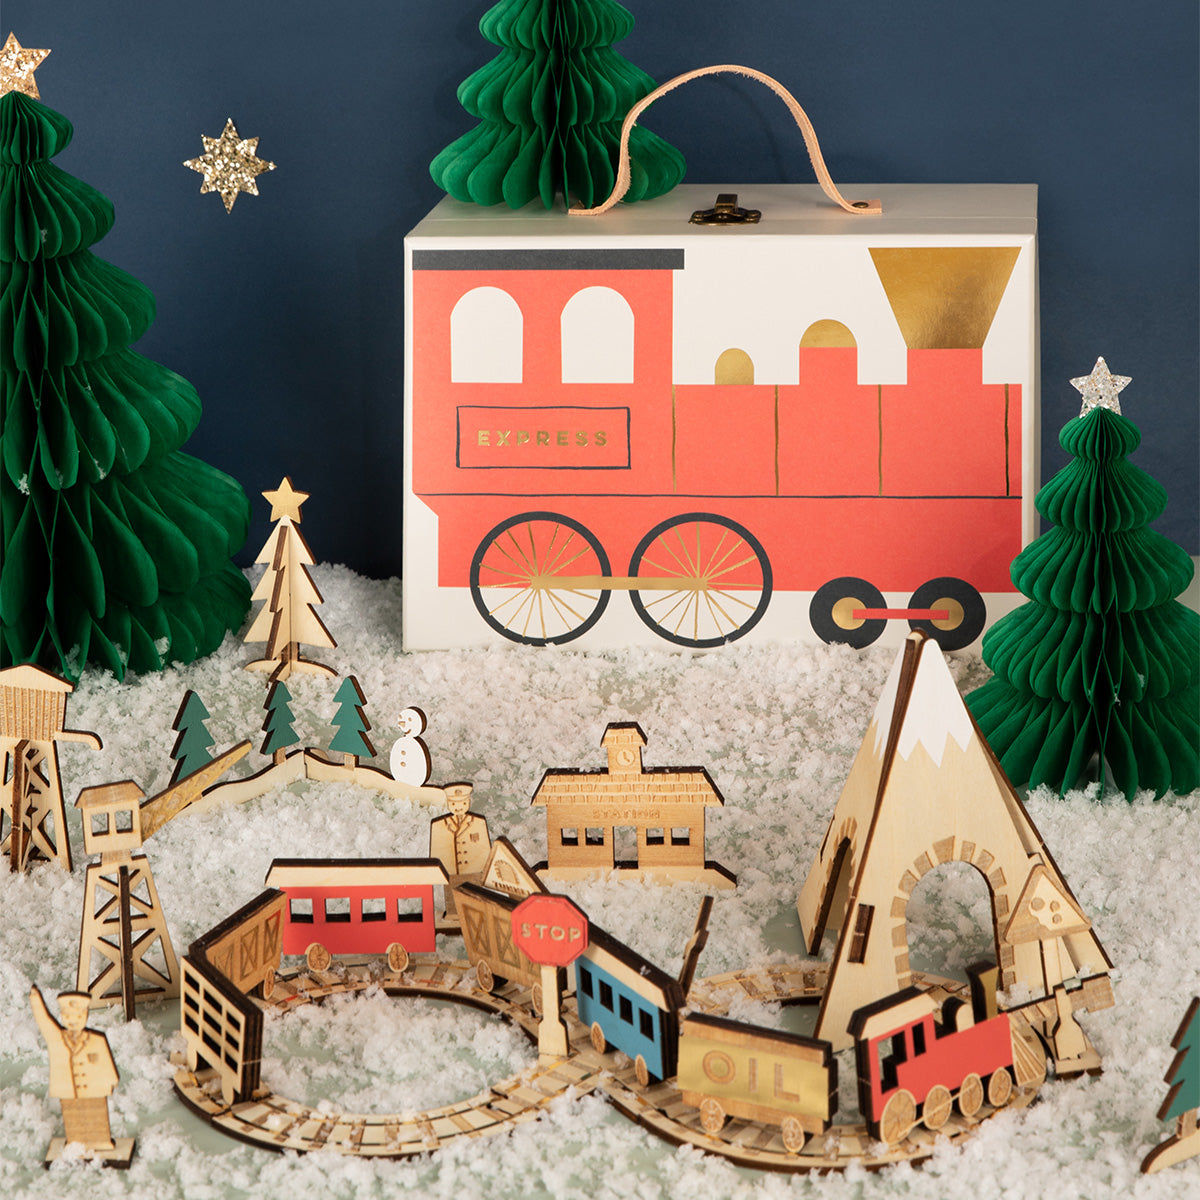 This kids advent calendar is presented in a mini suitcase which contains wooden trains.